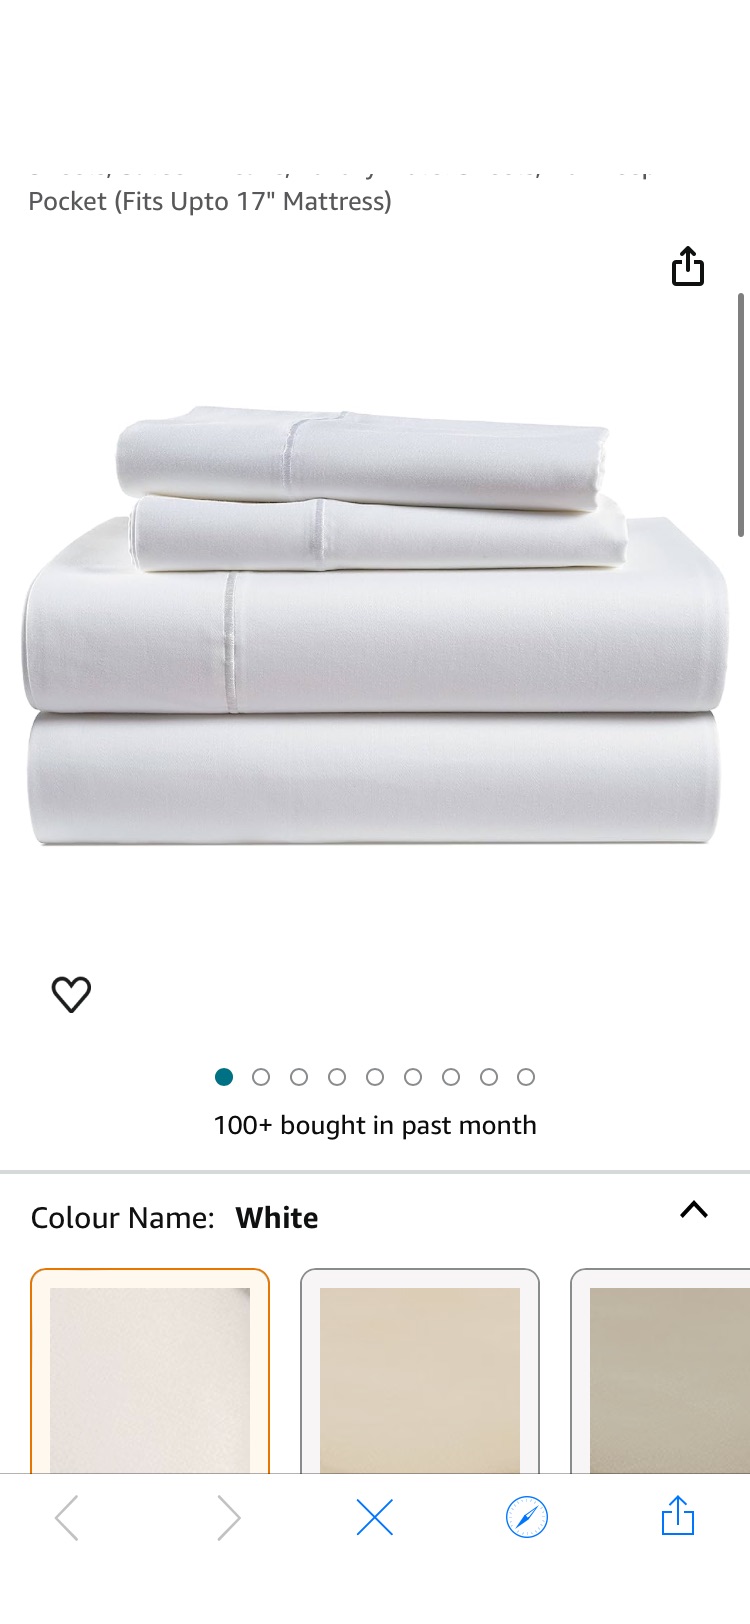 100% Egyptian Cotton Bed Sheets - 1000 Thread Count 4-Piece White King Sheets Set, Long Staple Cotton Bedding Sheets, Sateen Weave, Luxury Hotel Sheets, 16" Deep Pocket (Fits Upto 17" Mattress) : Amaz